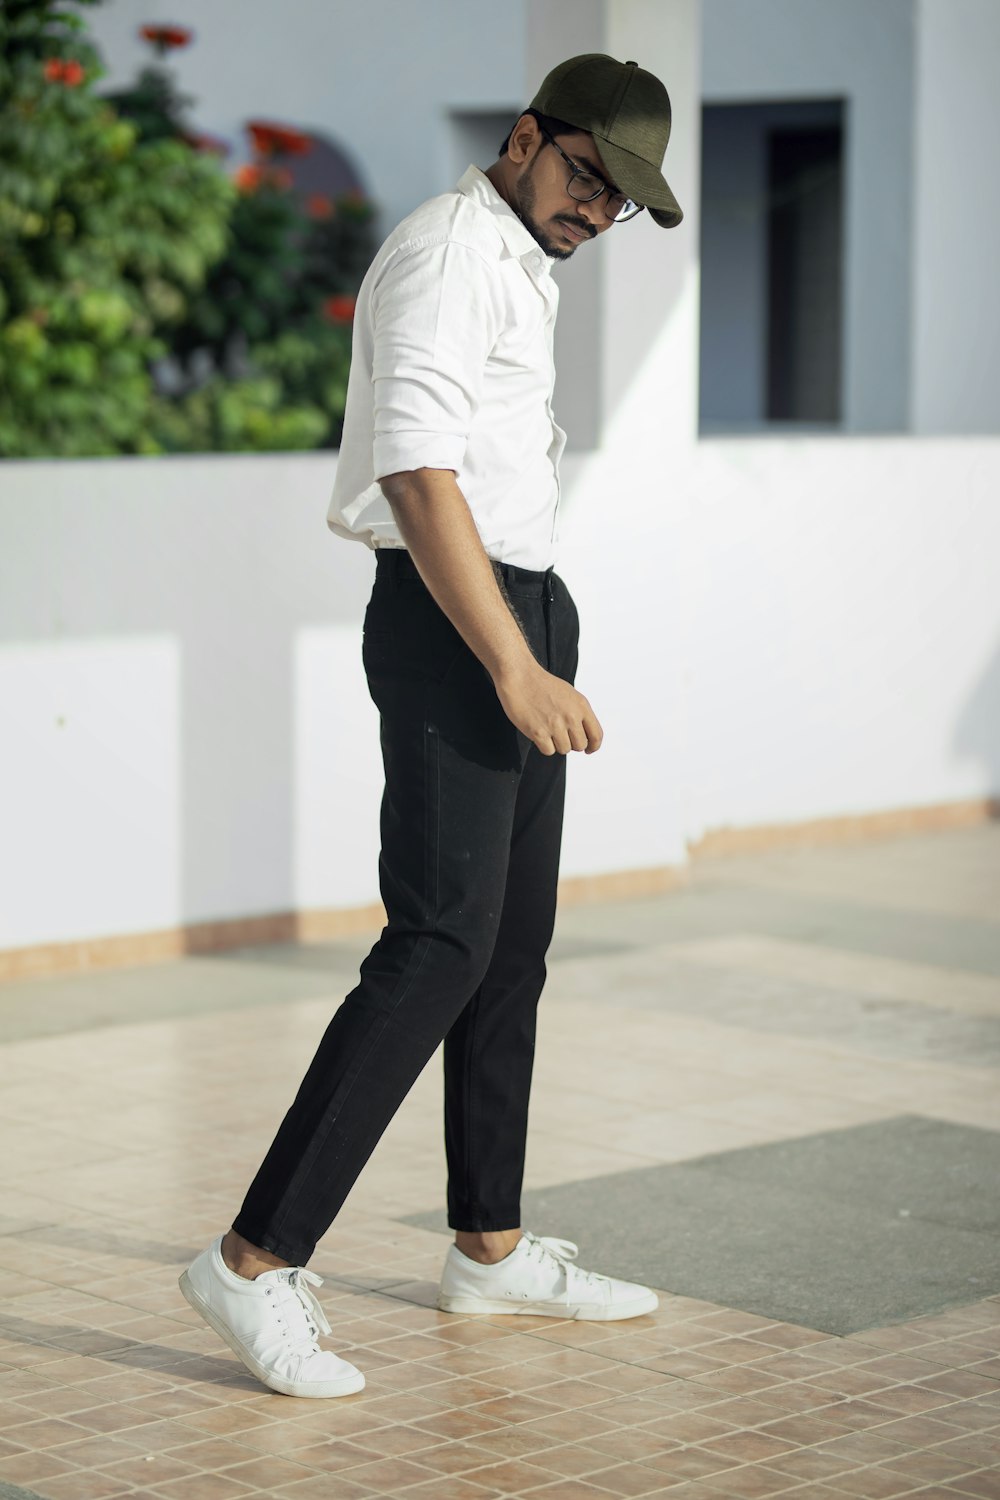 Man in white t-shirt and black pants standing on white floor photo – Free  Apparel Image on Unsplash